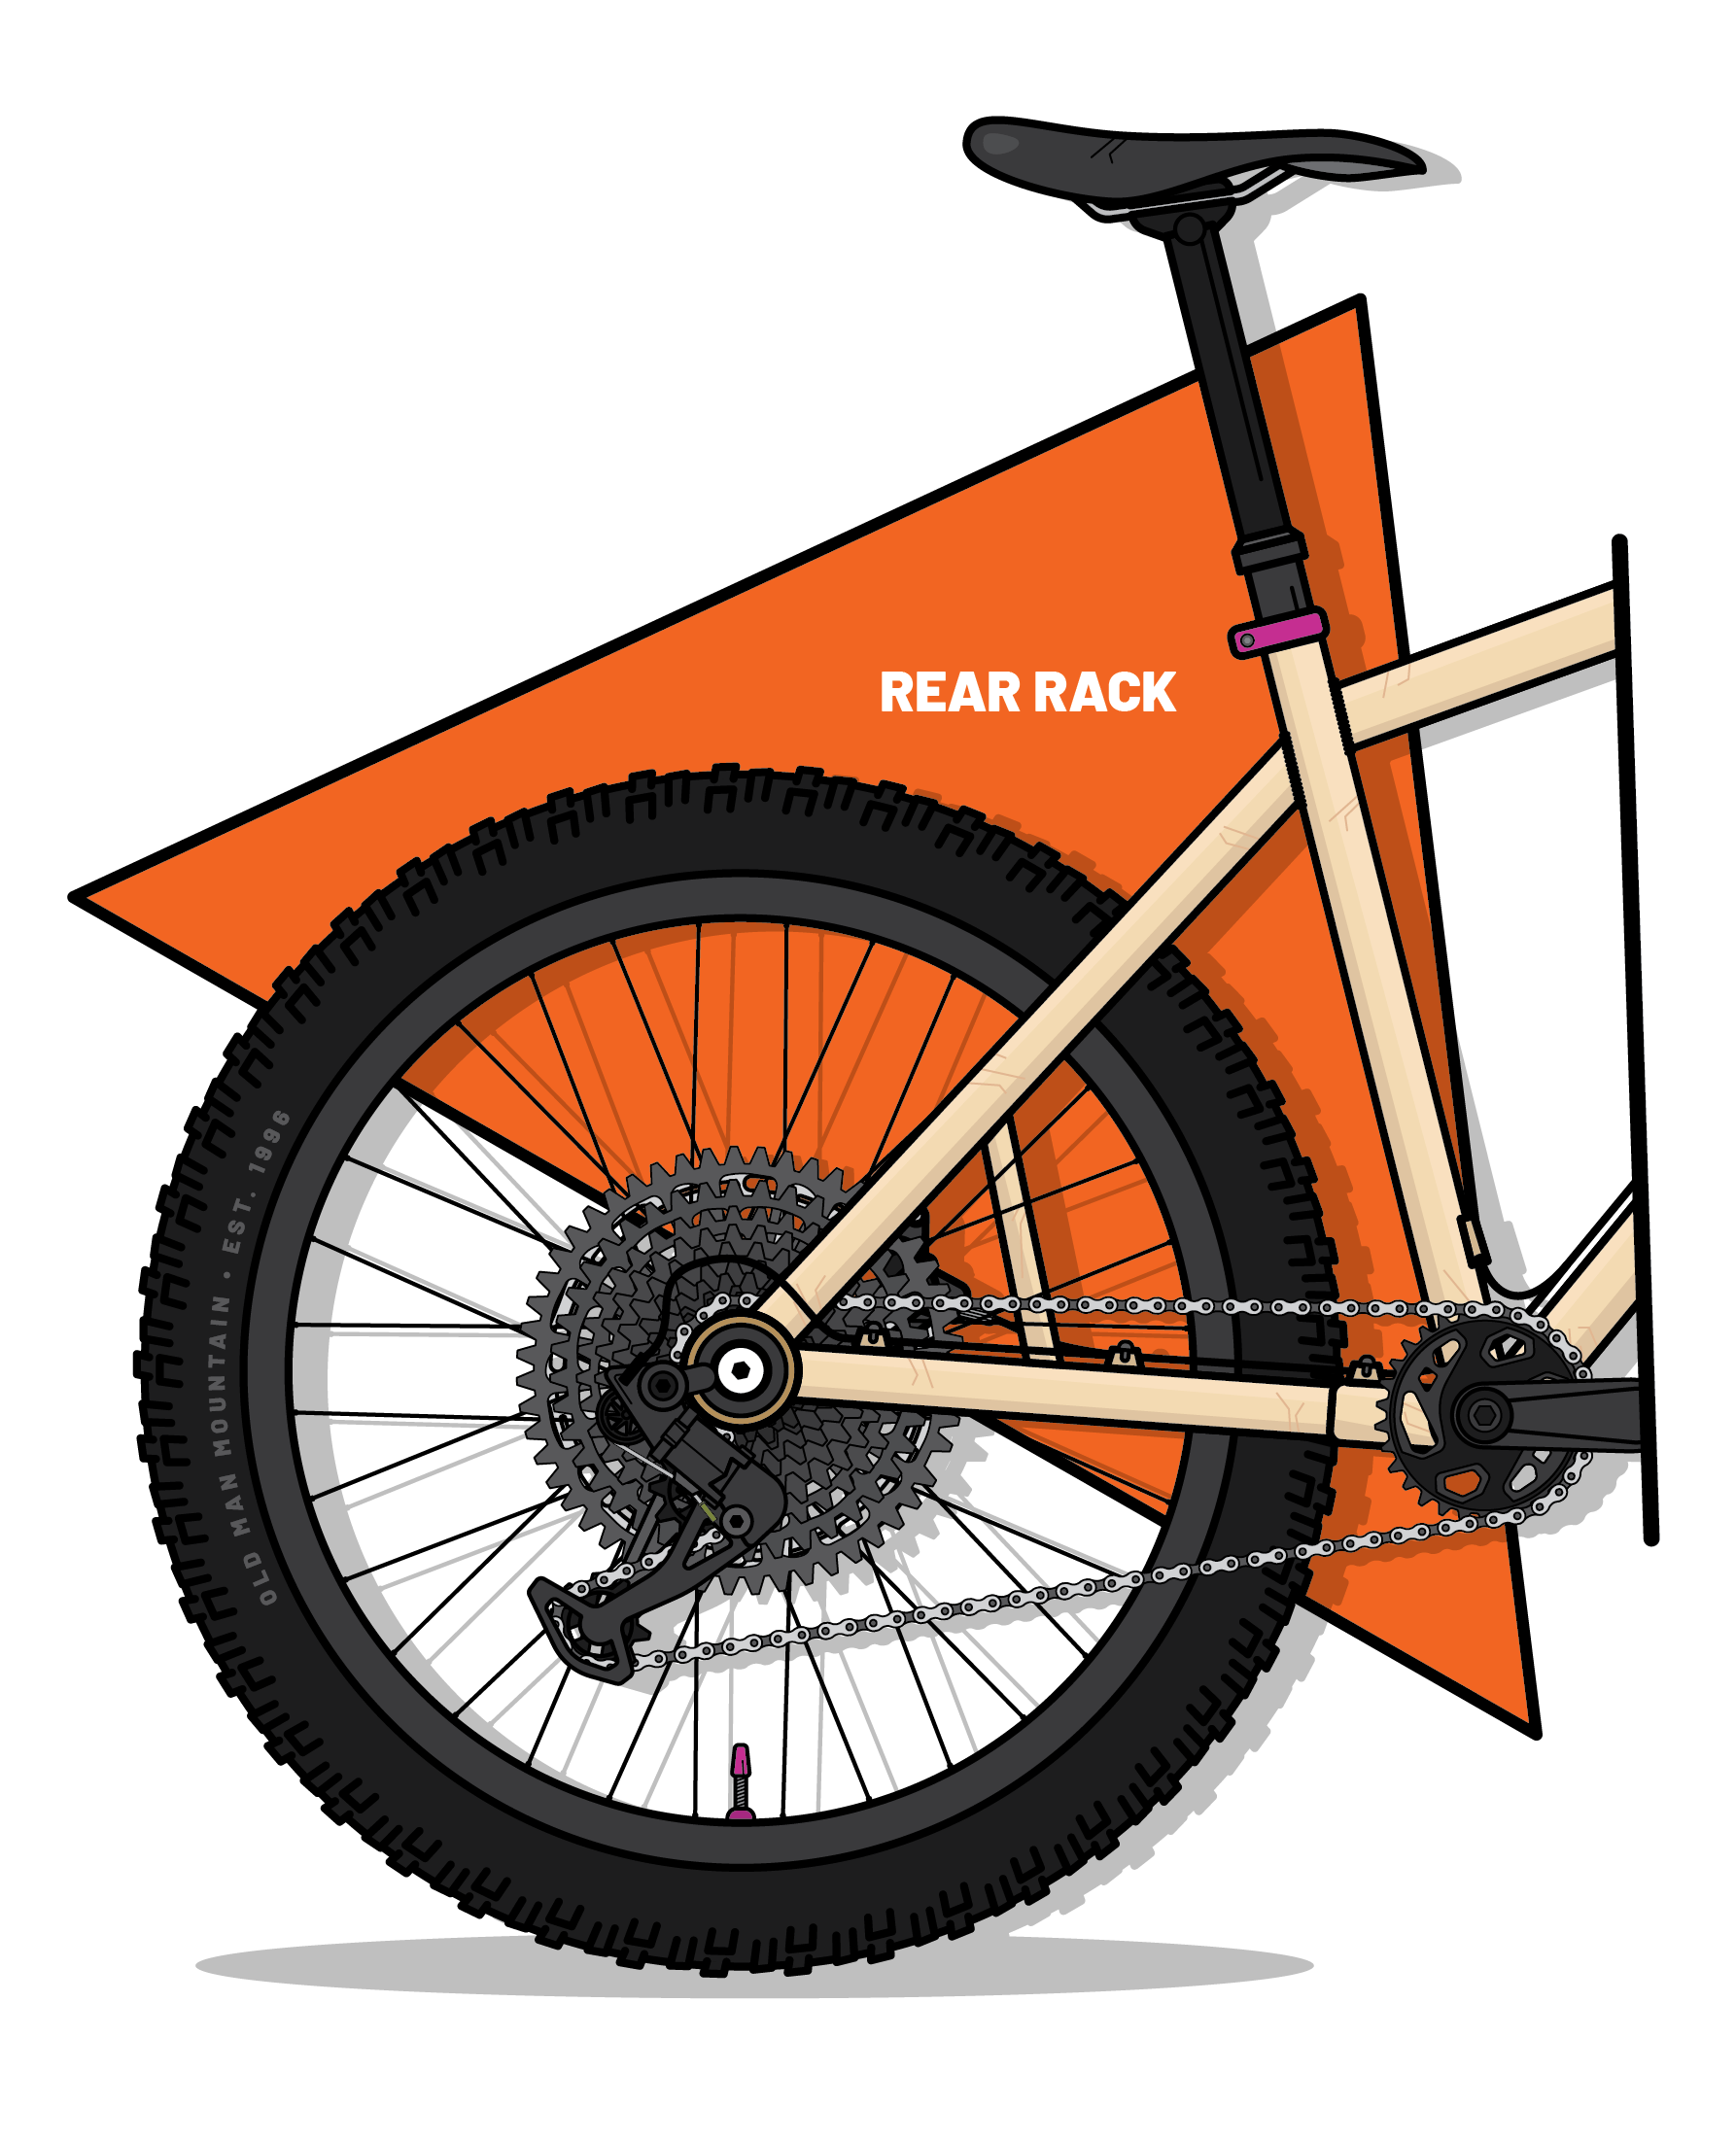 Rear Rack Overview